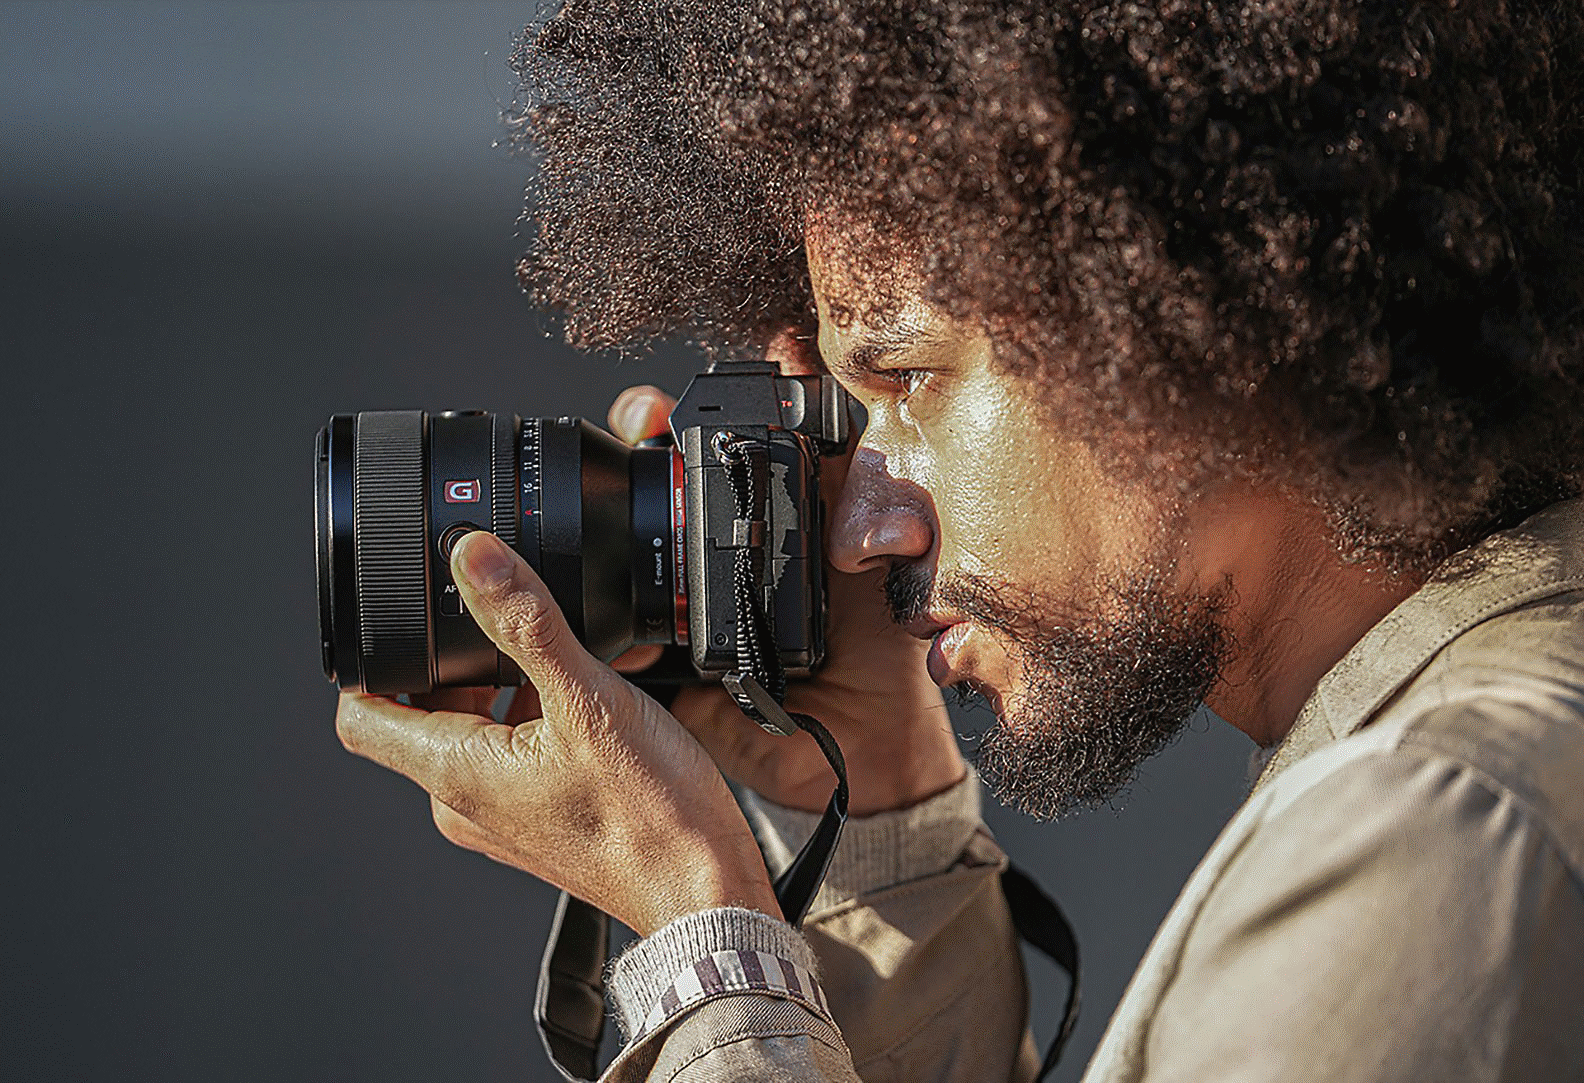 Image of a person holding a camera with the FE 50mm F1.2 GM lens attached